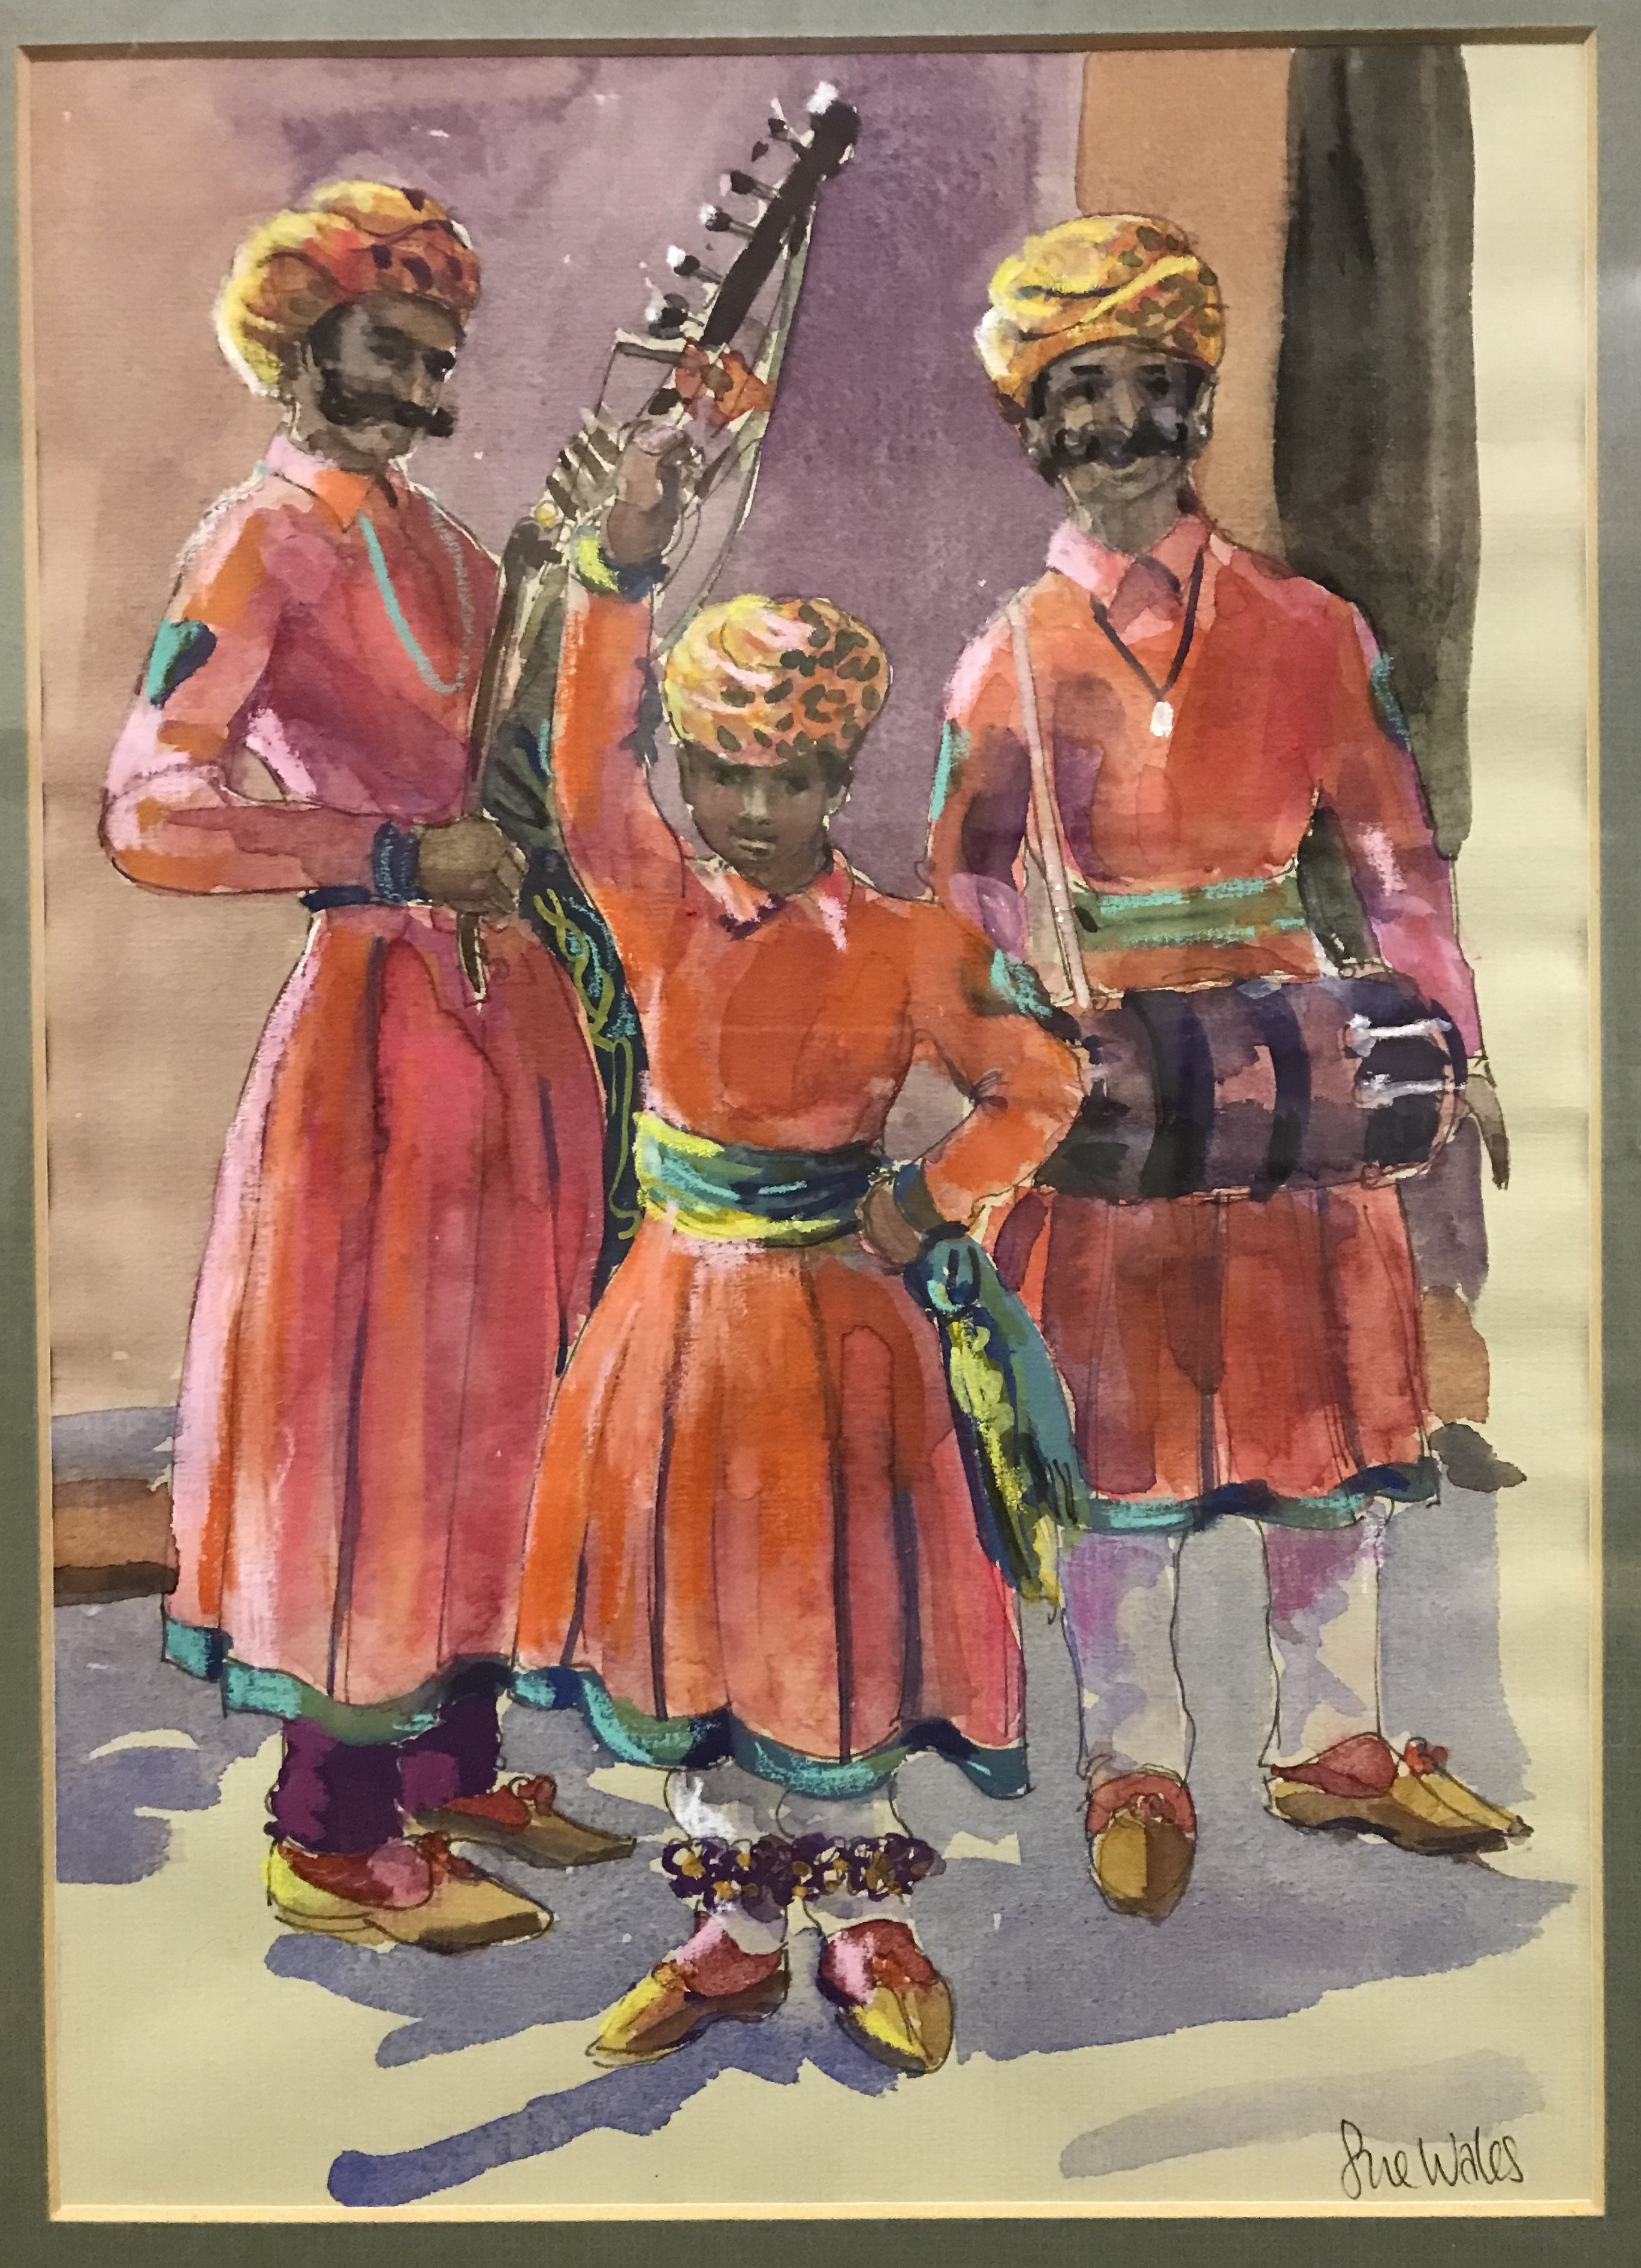 SUE WALES "Musician and boy dancers Jdaipur" watercolour, signed lower right, - Image 2 of 5